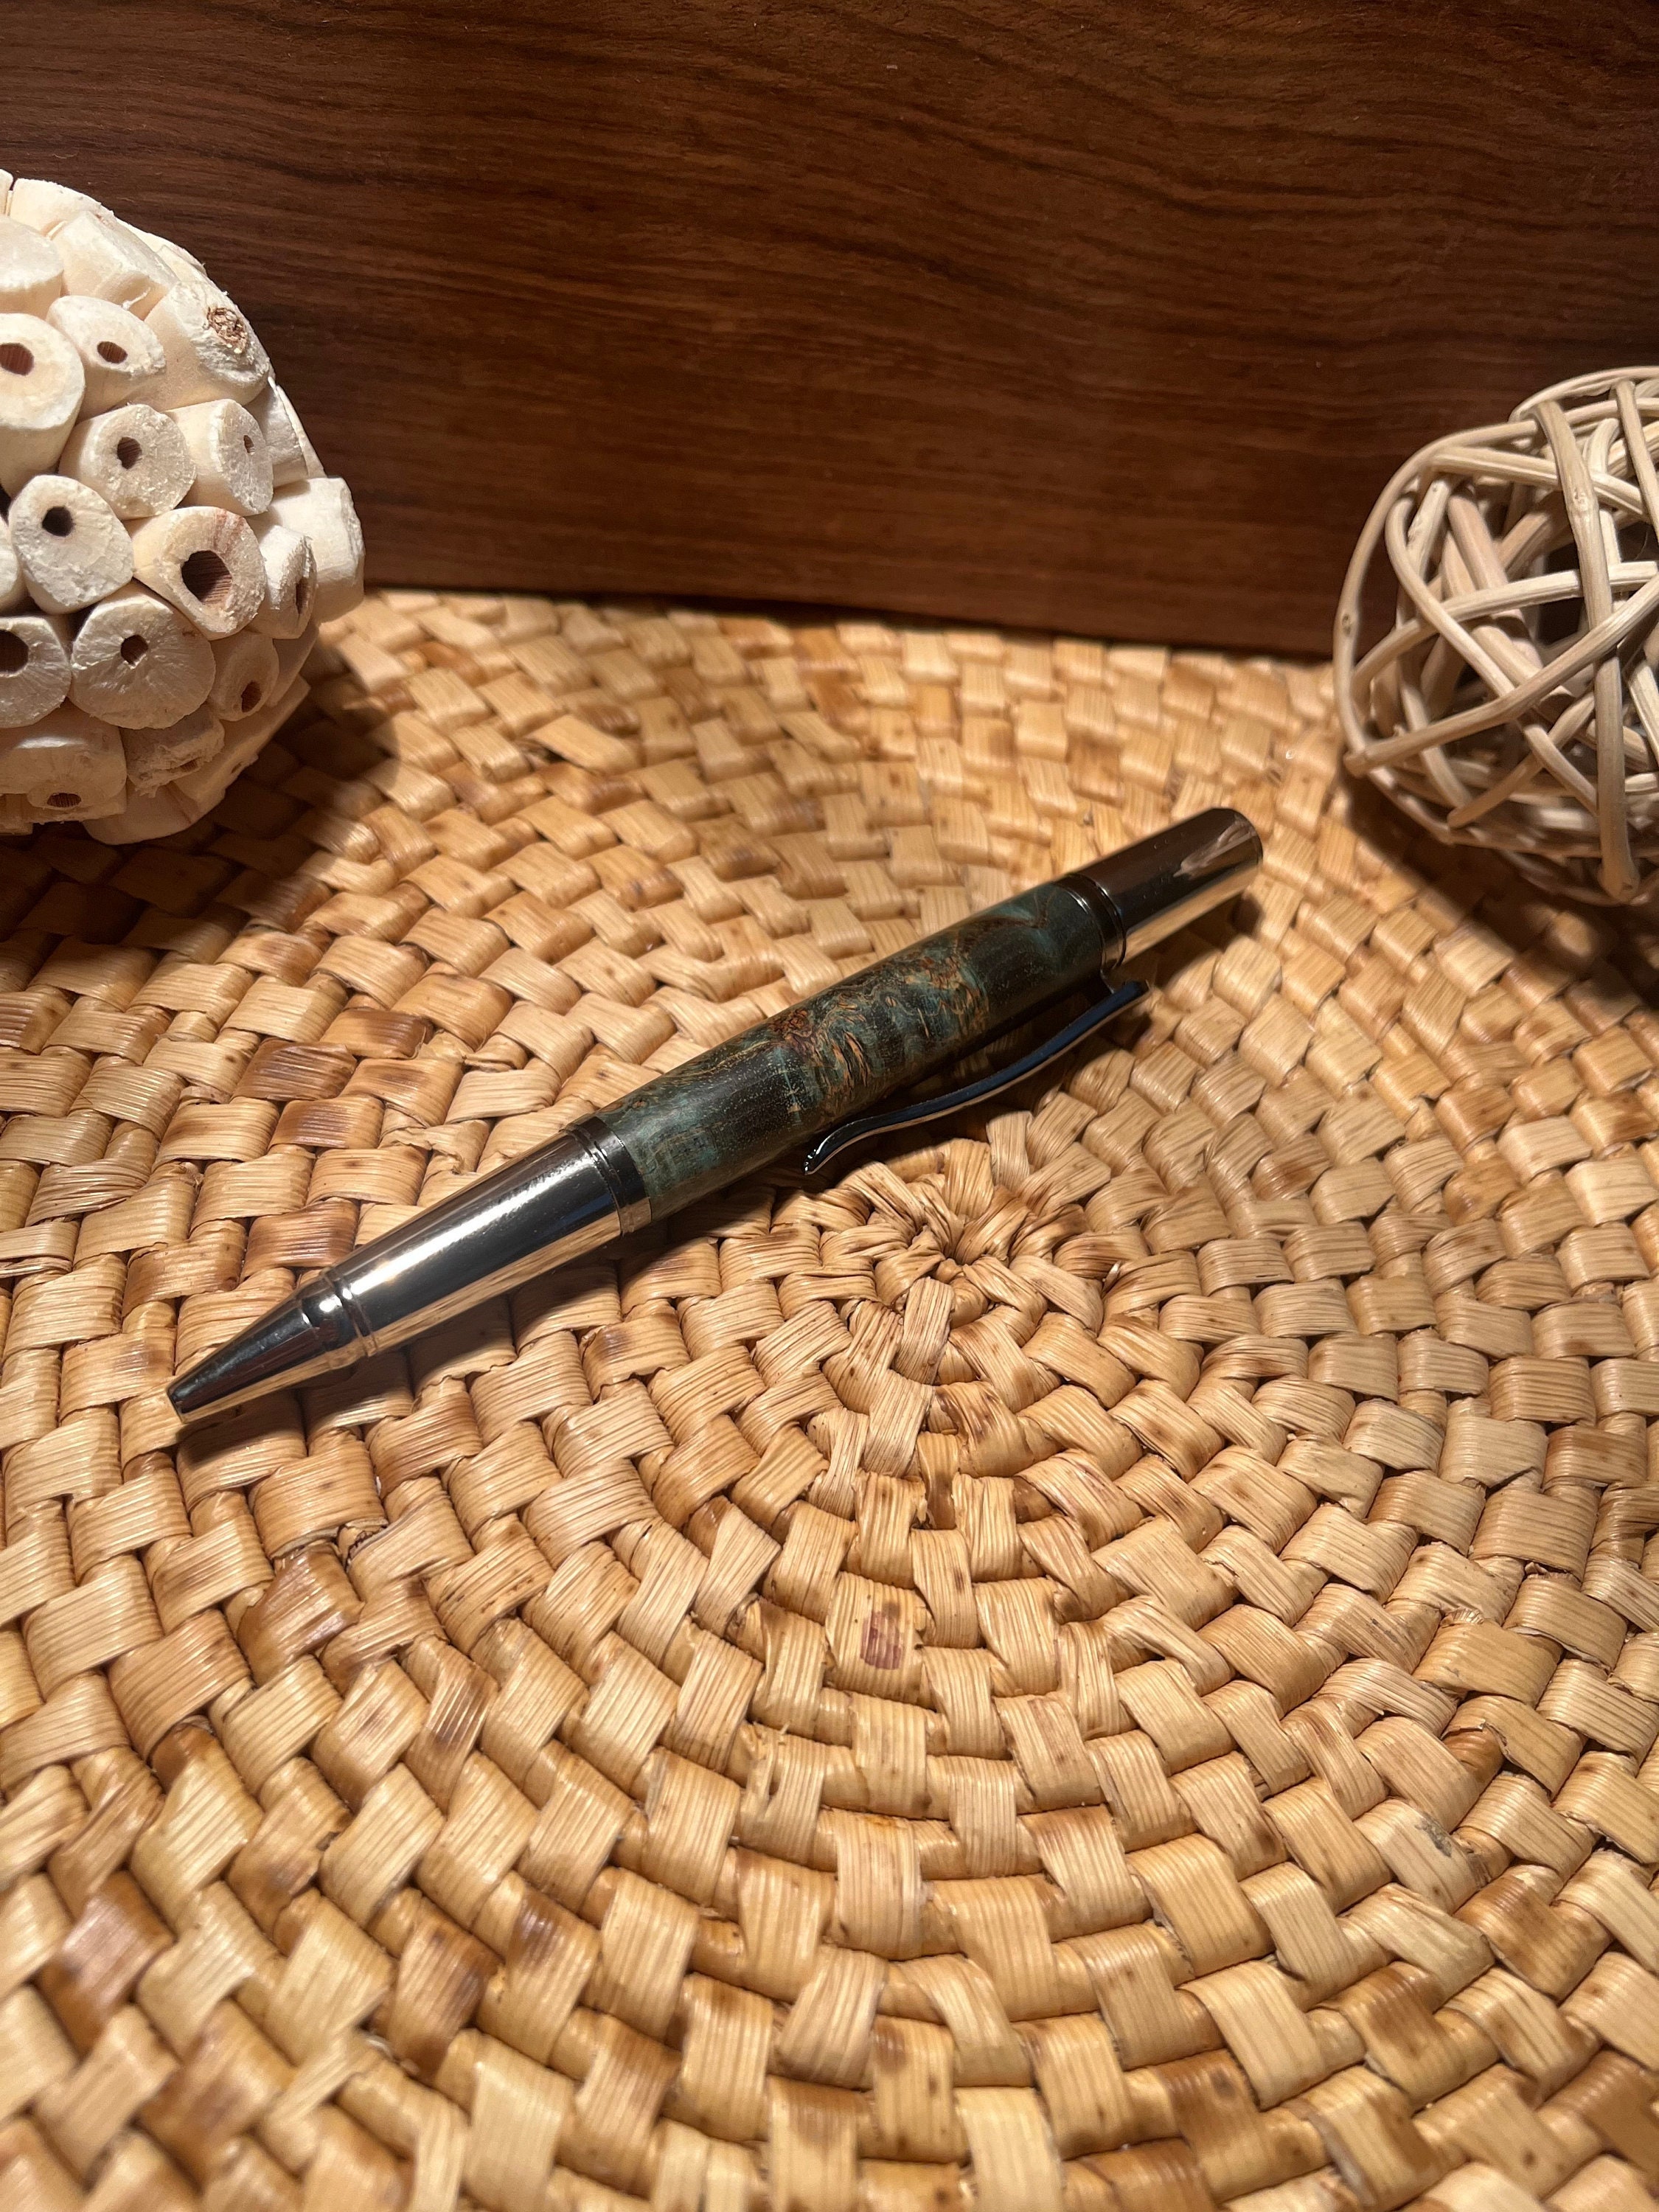 Pen tray and paperweight in ash wood - n°2